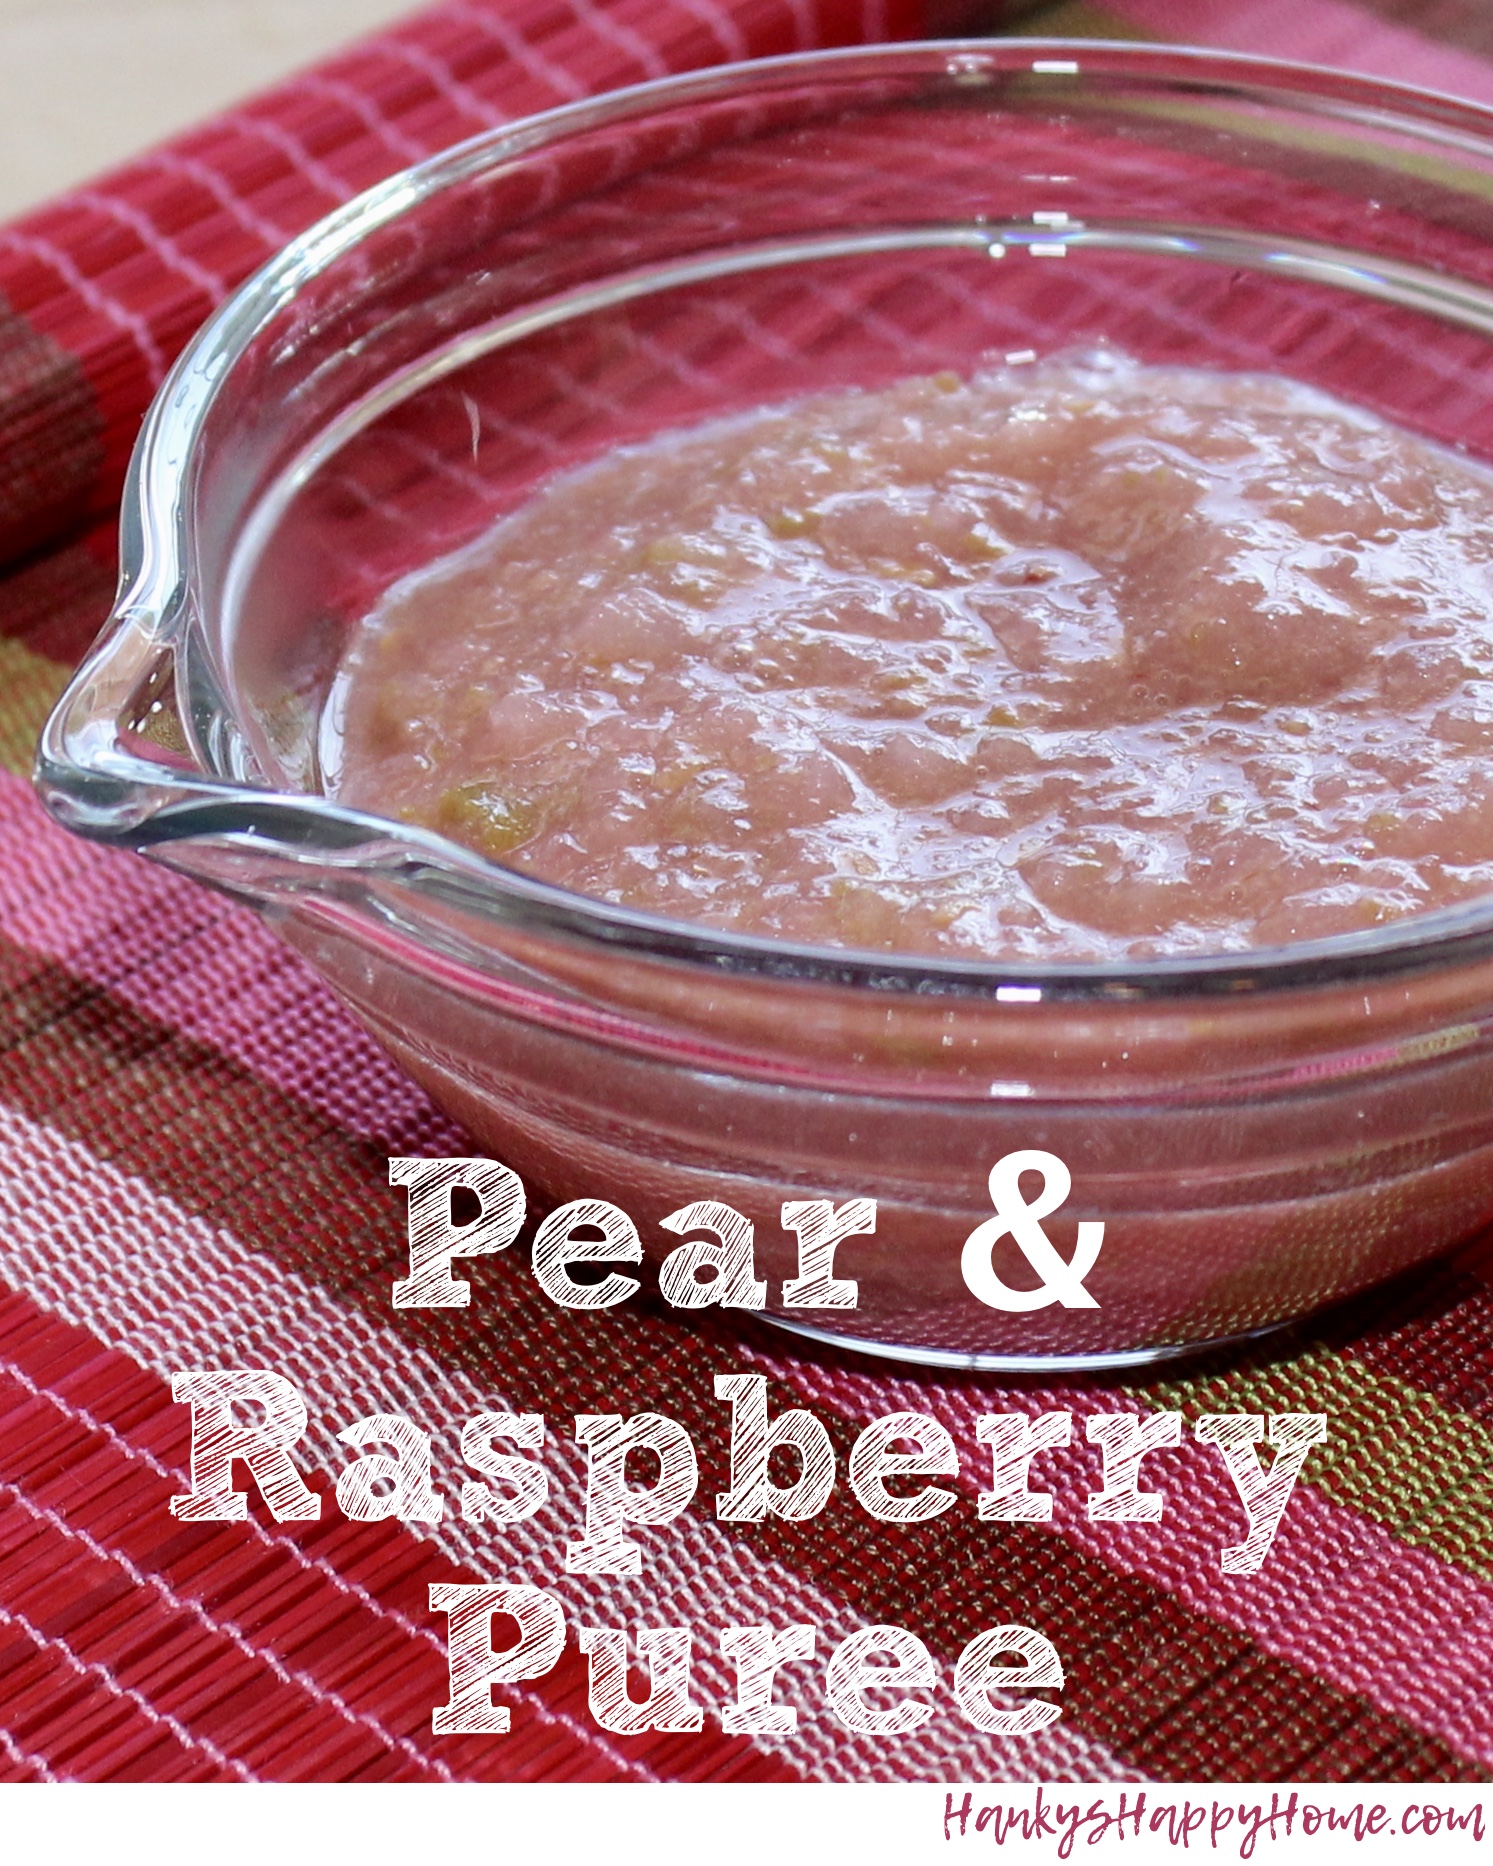 Pear & Raspberry Puree makes a flavorful baby food and is high in fiber, vitamin C, and potassium!